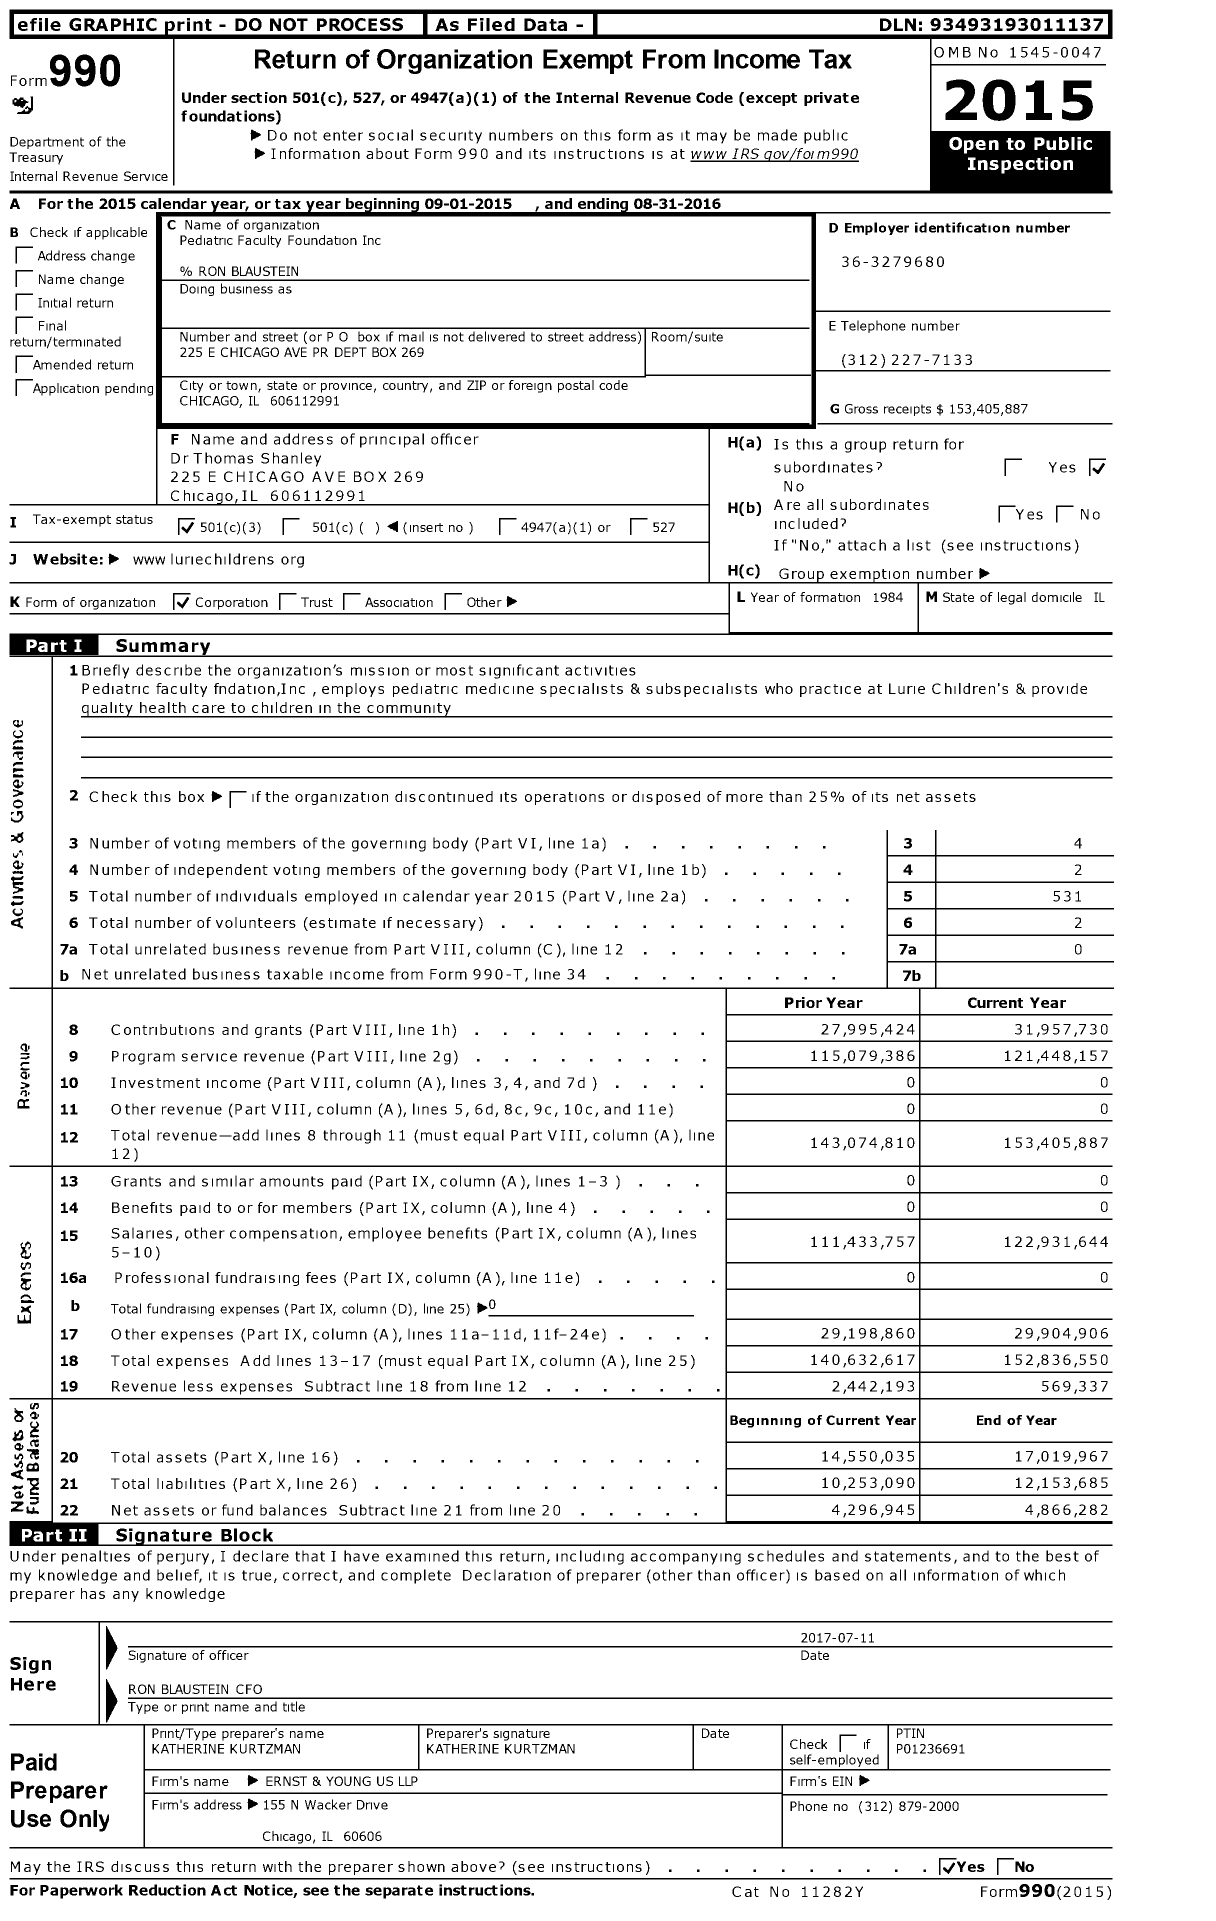 Image of first page of 2015 Form 990 for Pediatric Faculty Foundation